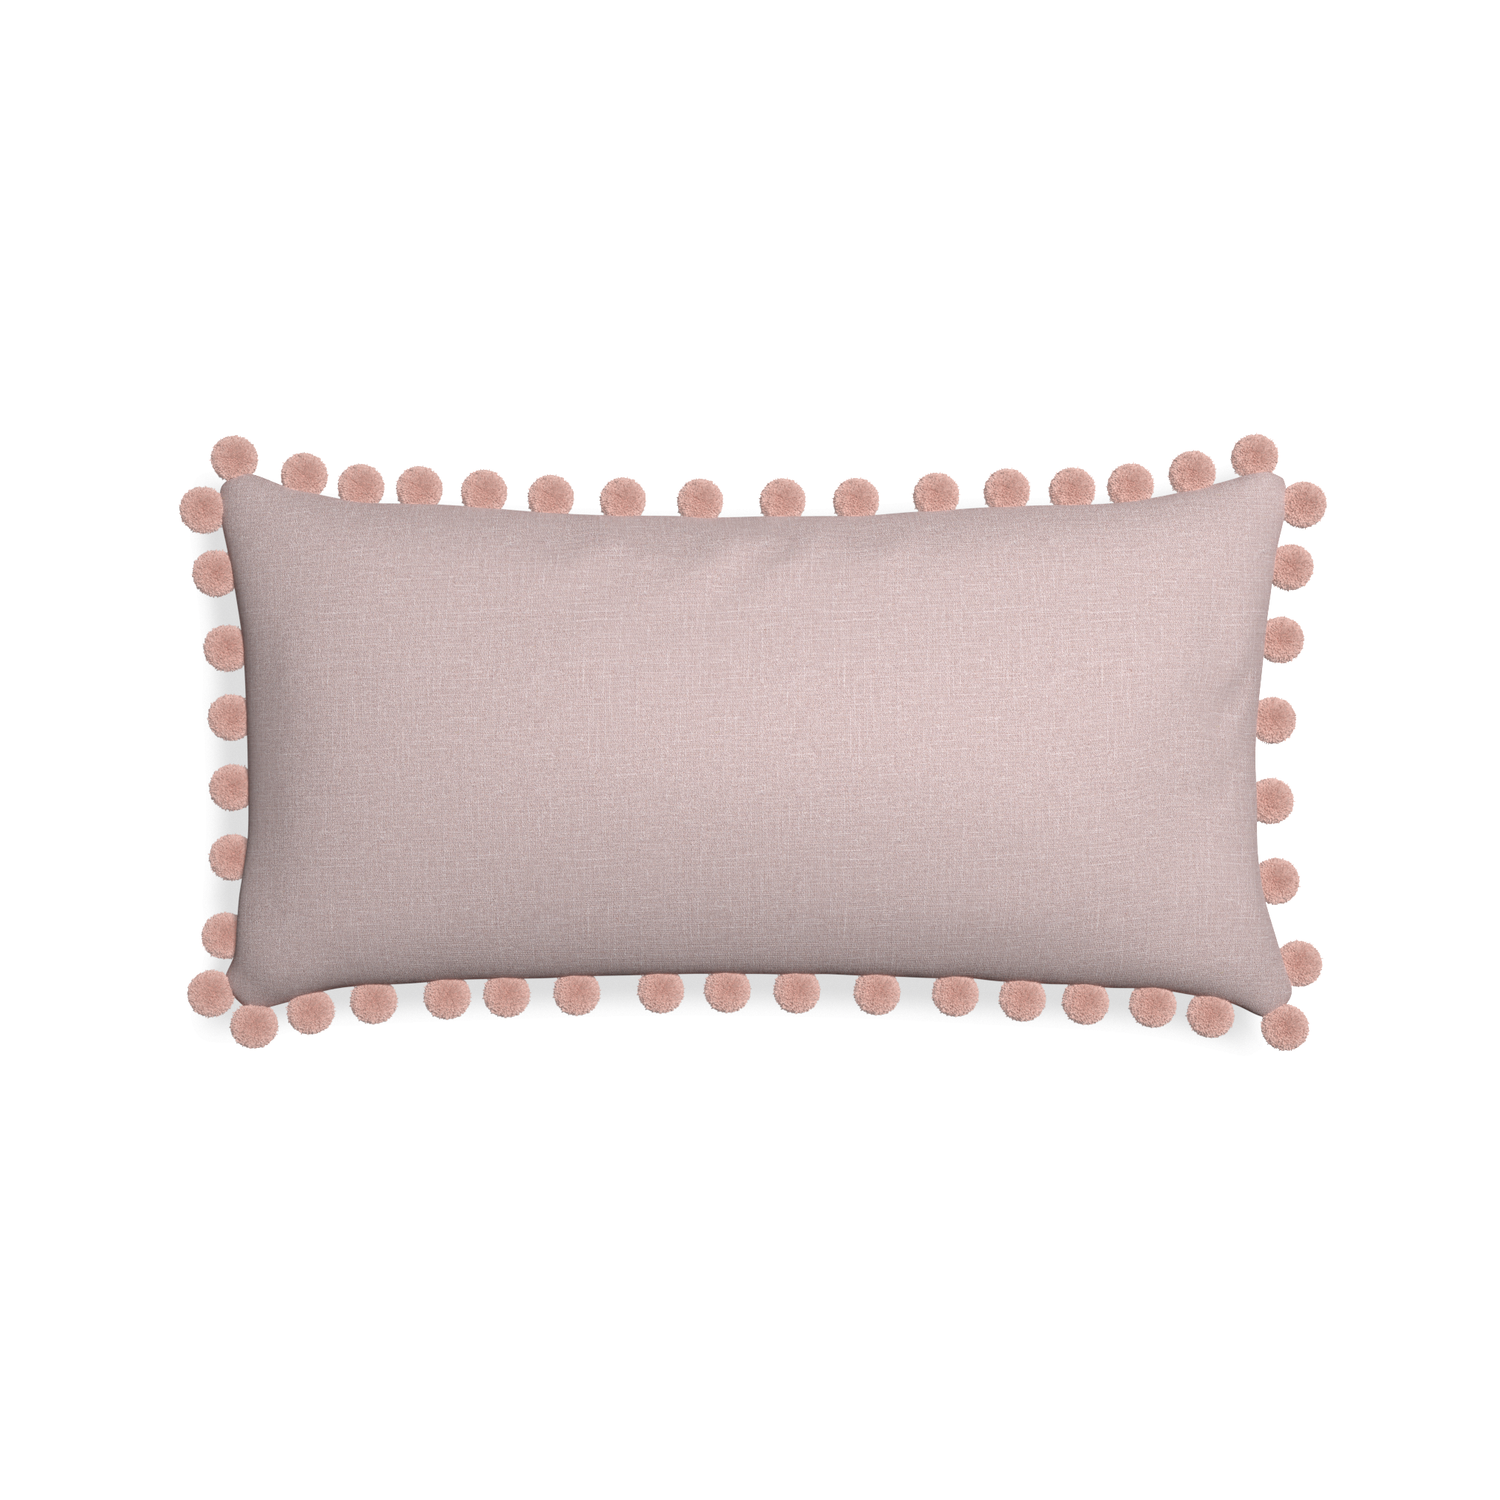 Midi-lumbar orchid custom mauve pinkpillow with rose pom pom on white background